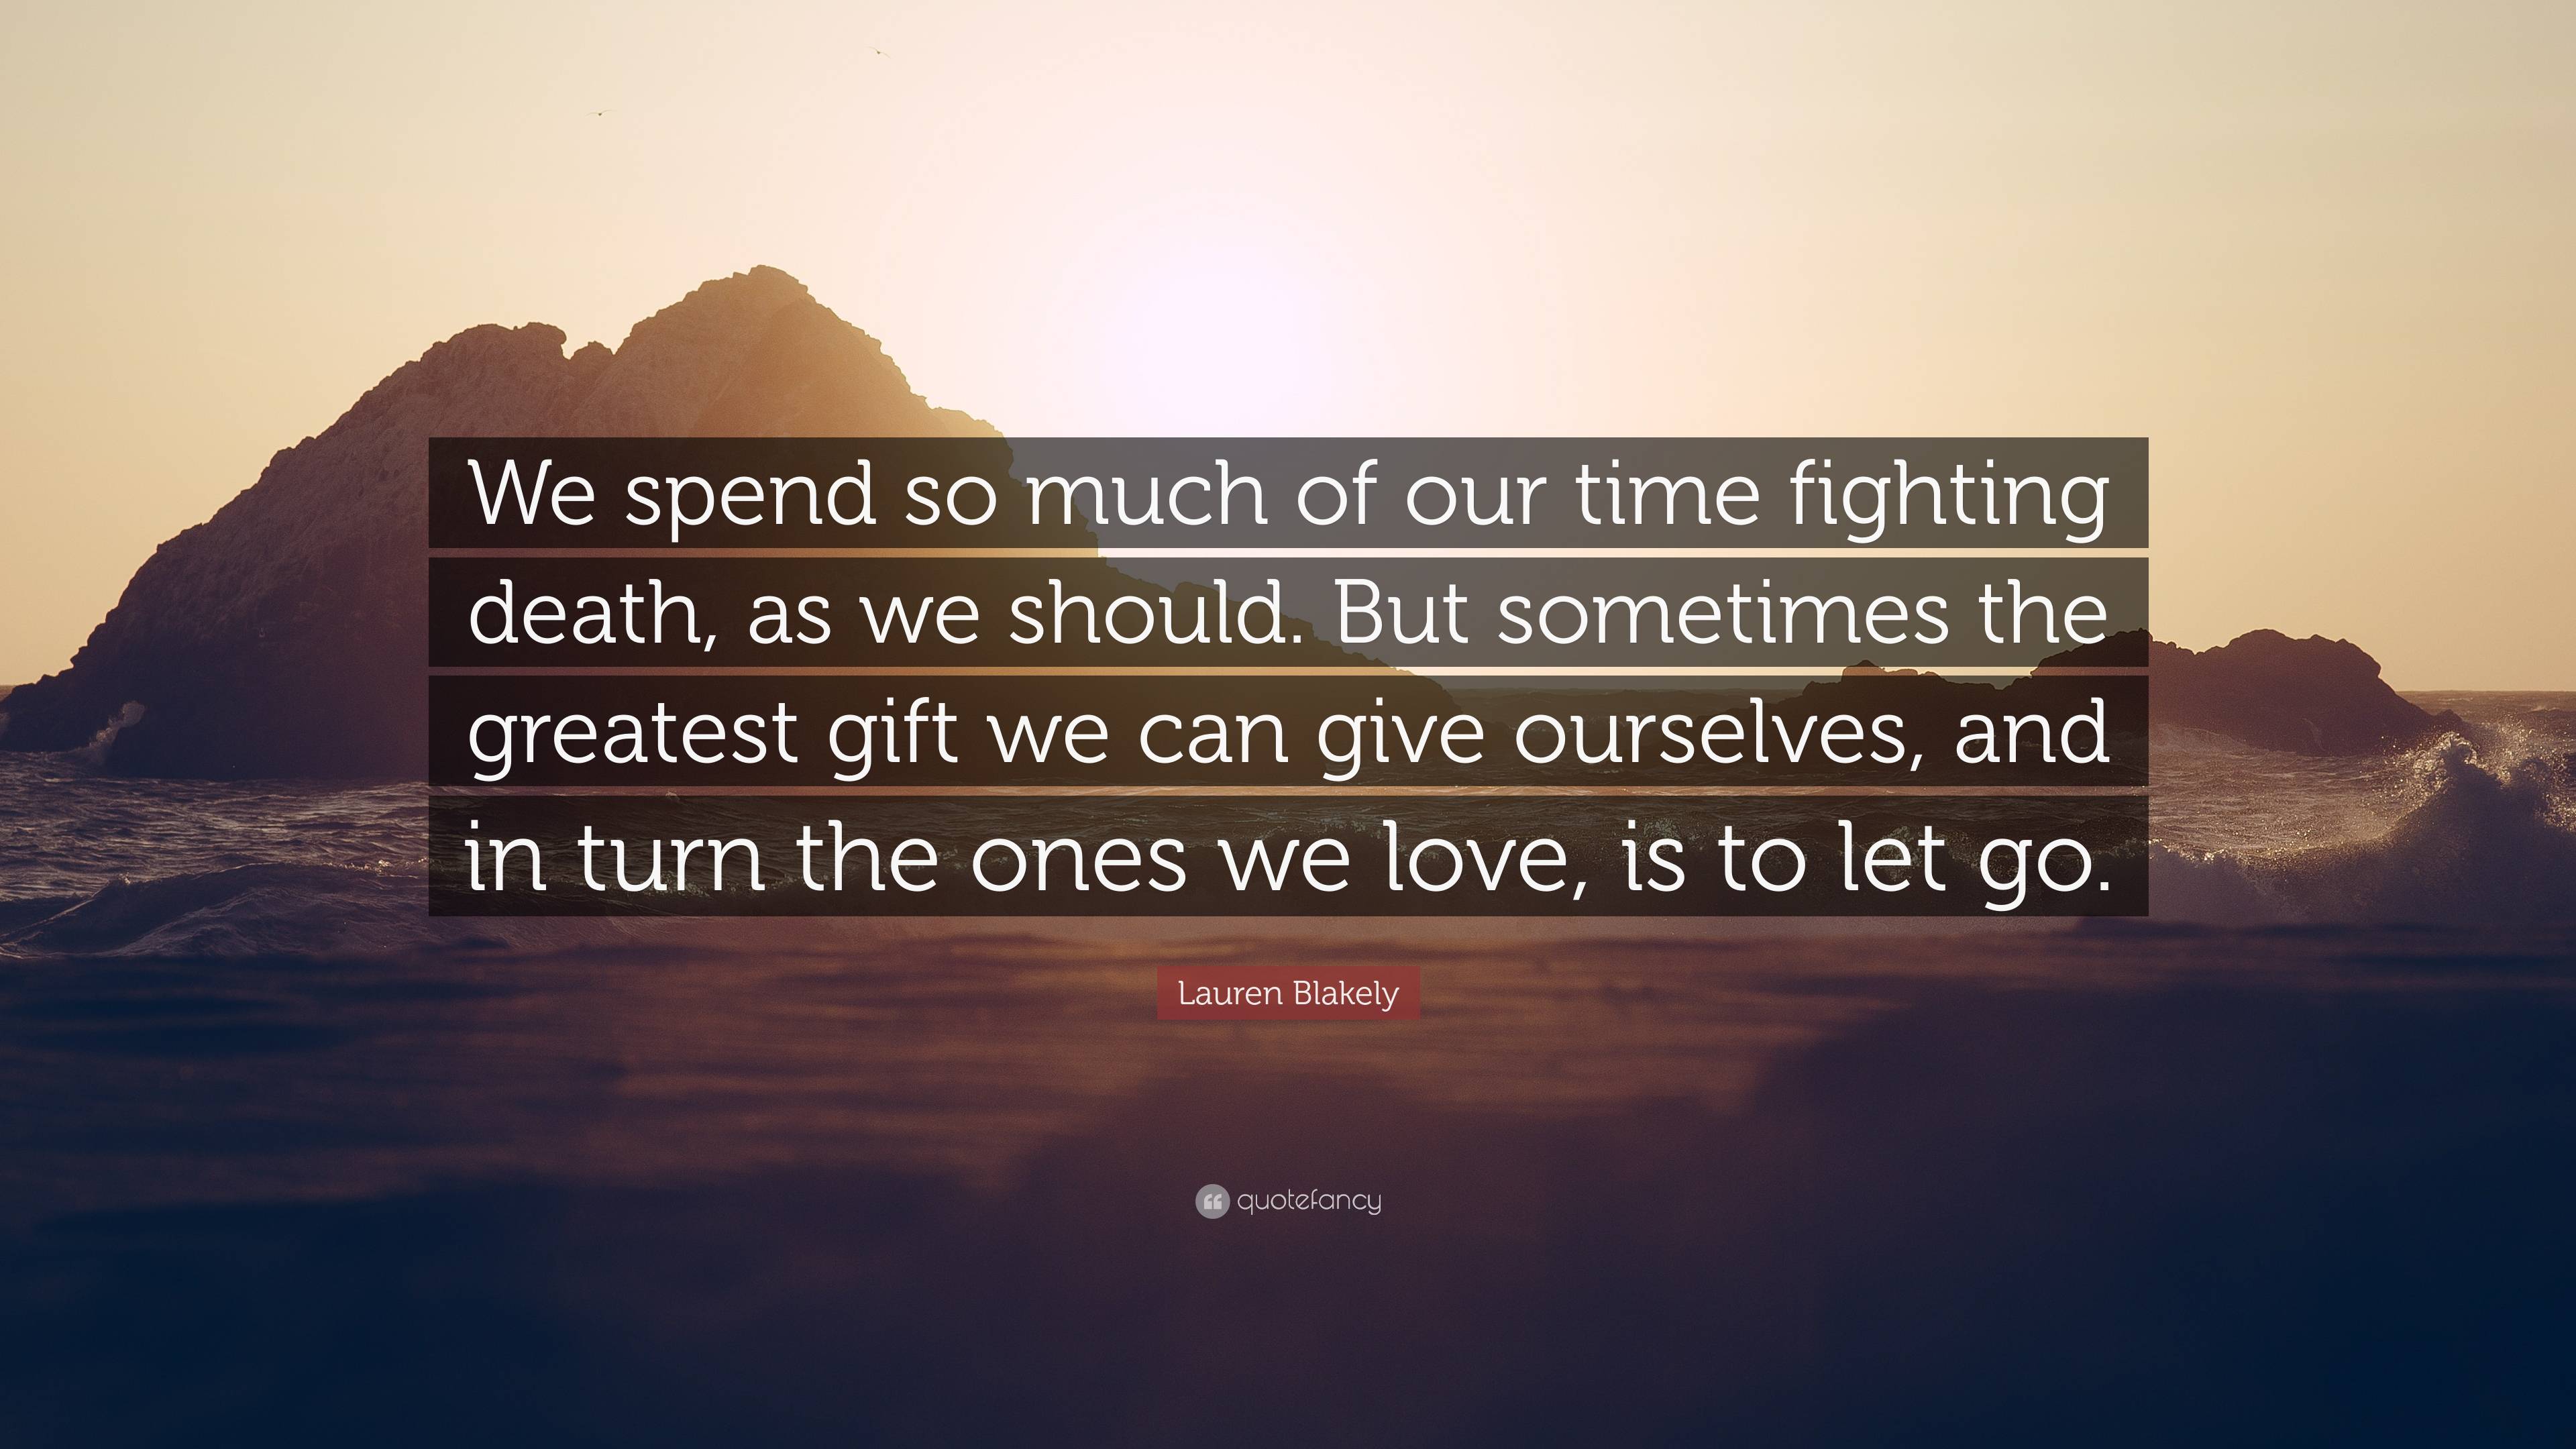 Lauren Blakely Quote: “We spend so much of our time fighting death, as ...